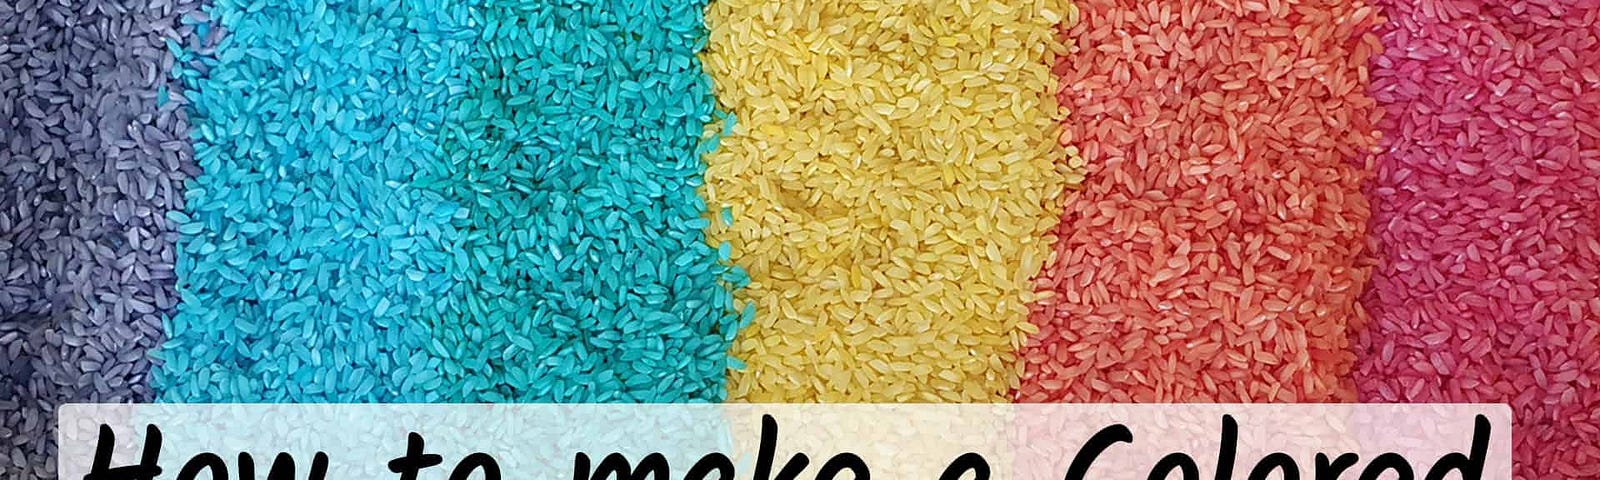 How to Make a Colored Rainbow Rice — Indoors Activity for Kids — Cover Image